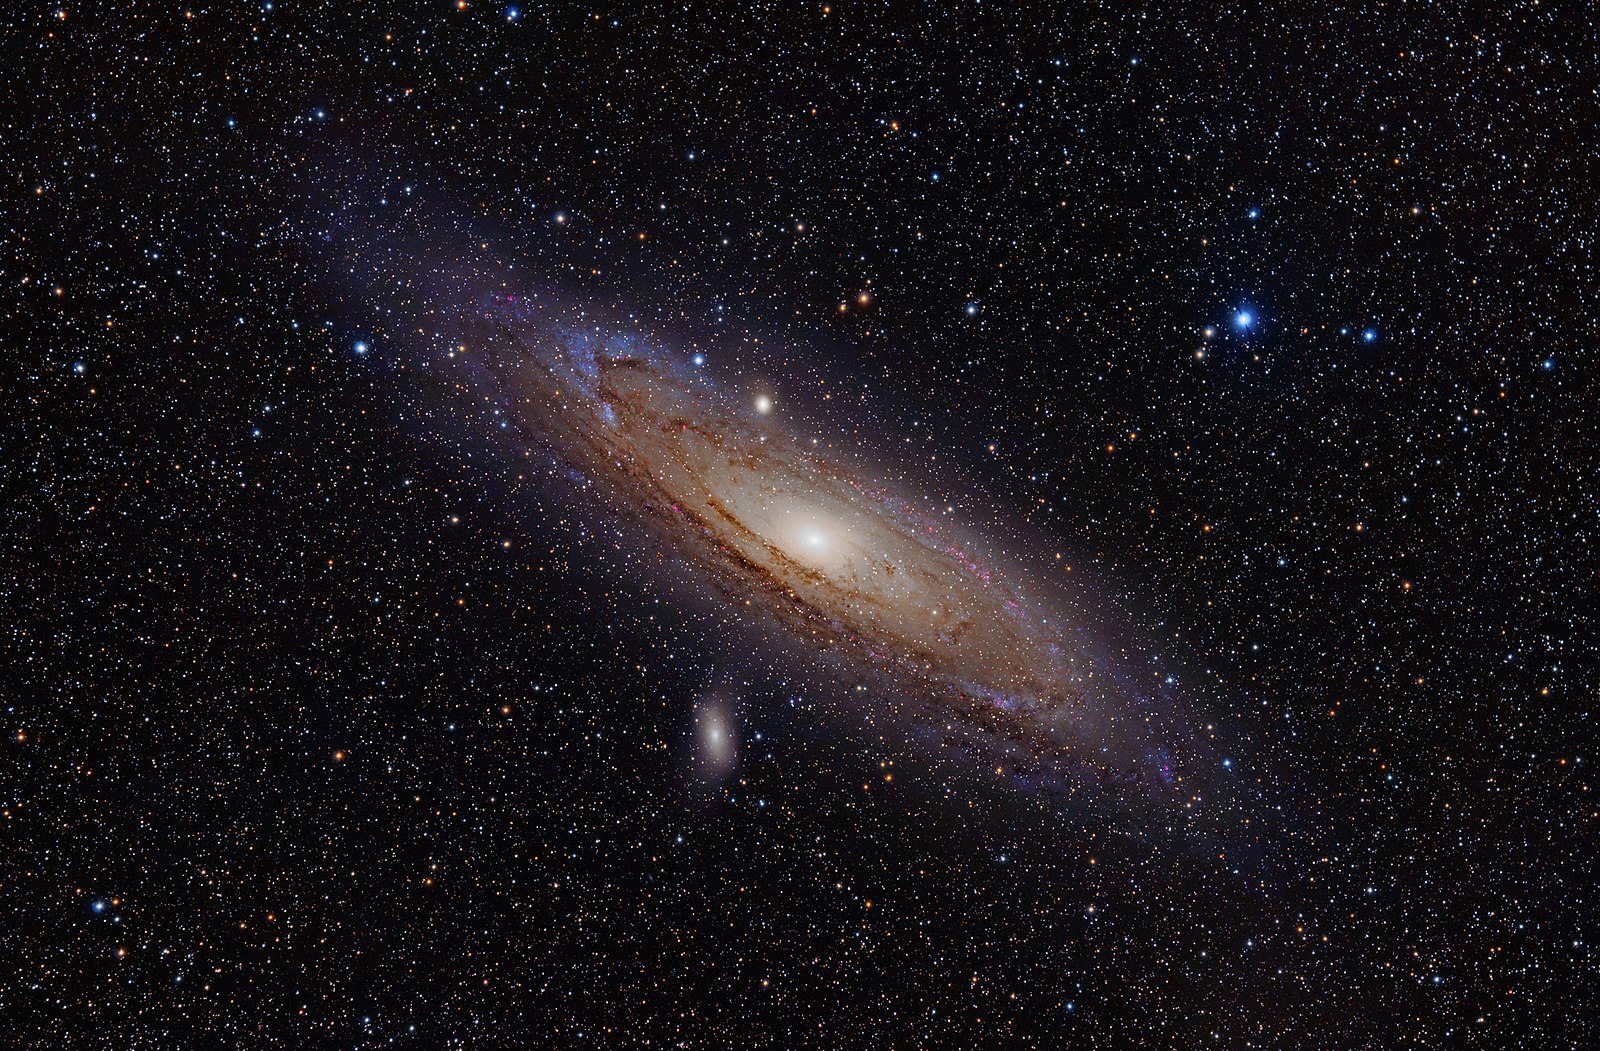 The Andromeda galaxy. We cannot picture the Milky Way from within it, but astronomers think our own Galaxy looks similar to Andromeda.